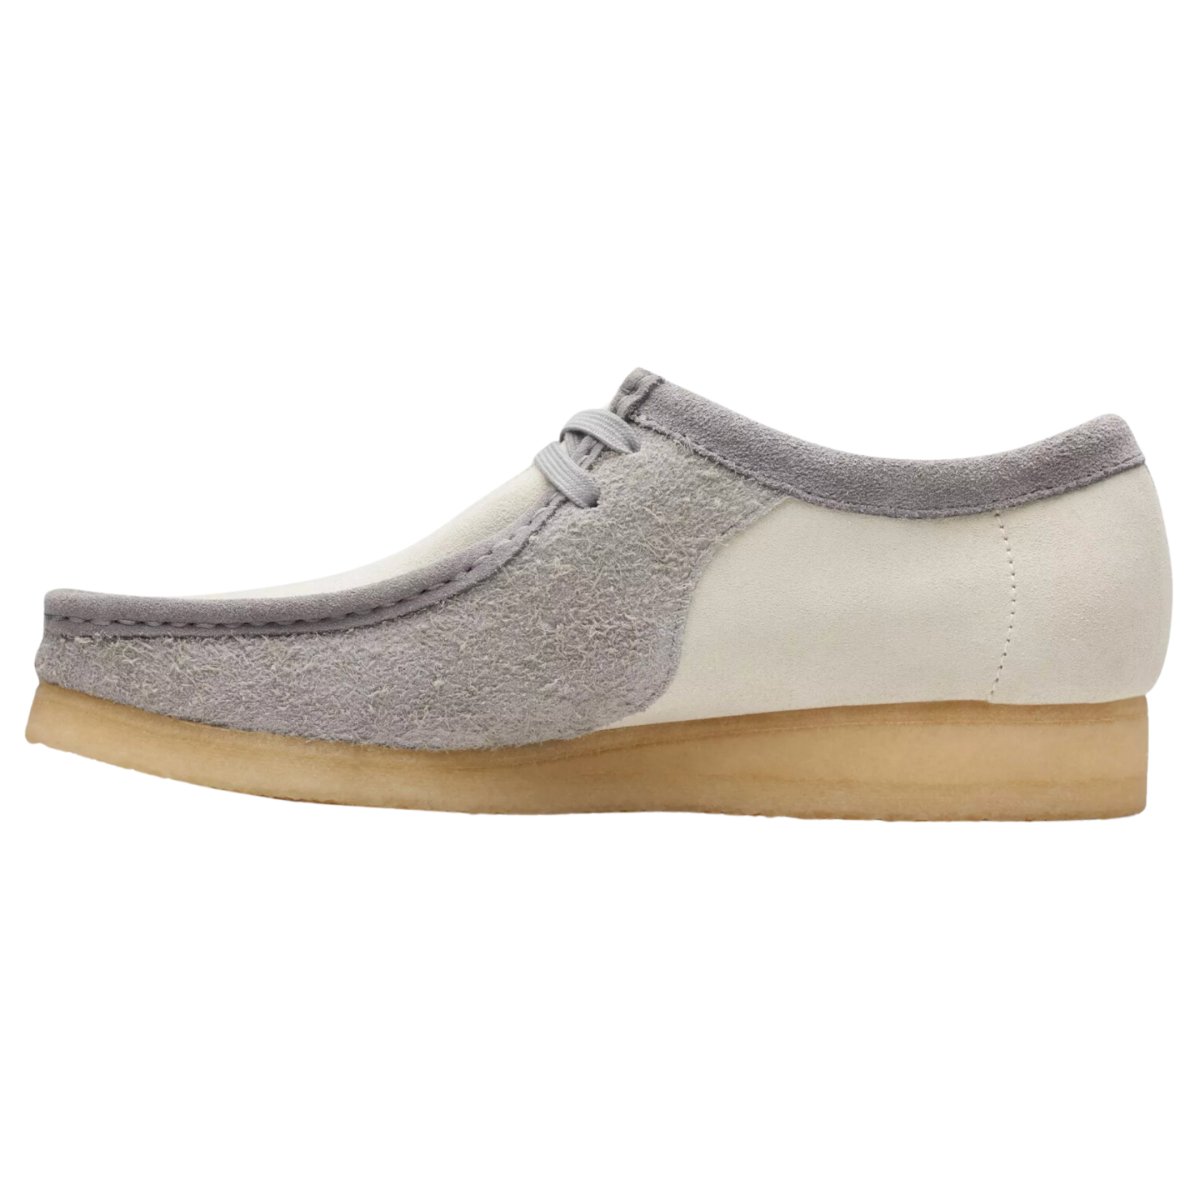 Clarks Men's Wallabee Grey/Off White - 5020930 - West NYC